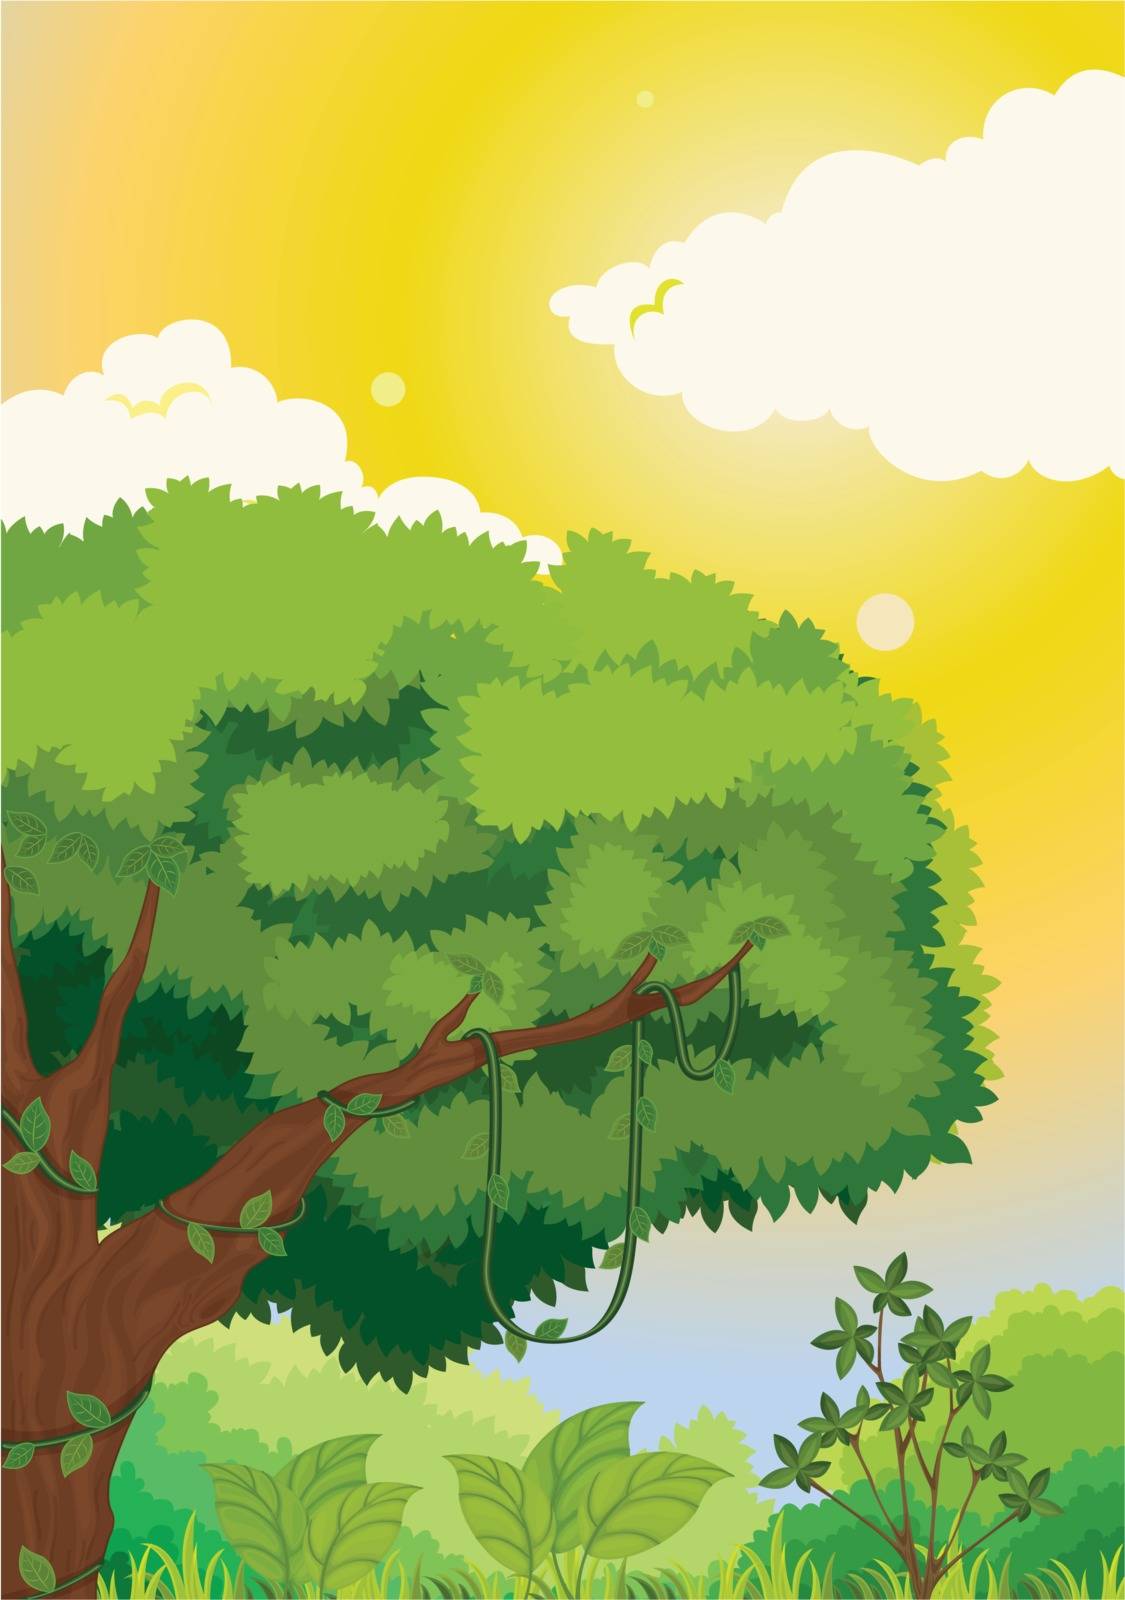 Forest illustration on a white background